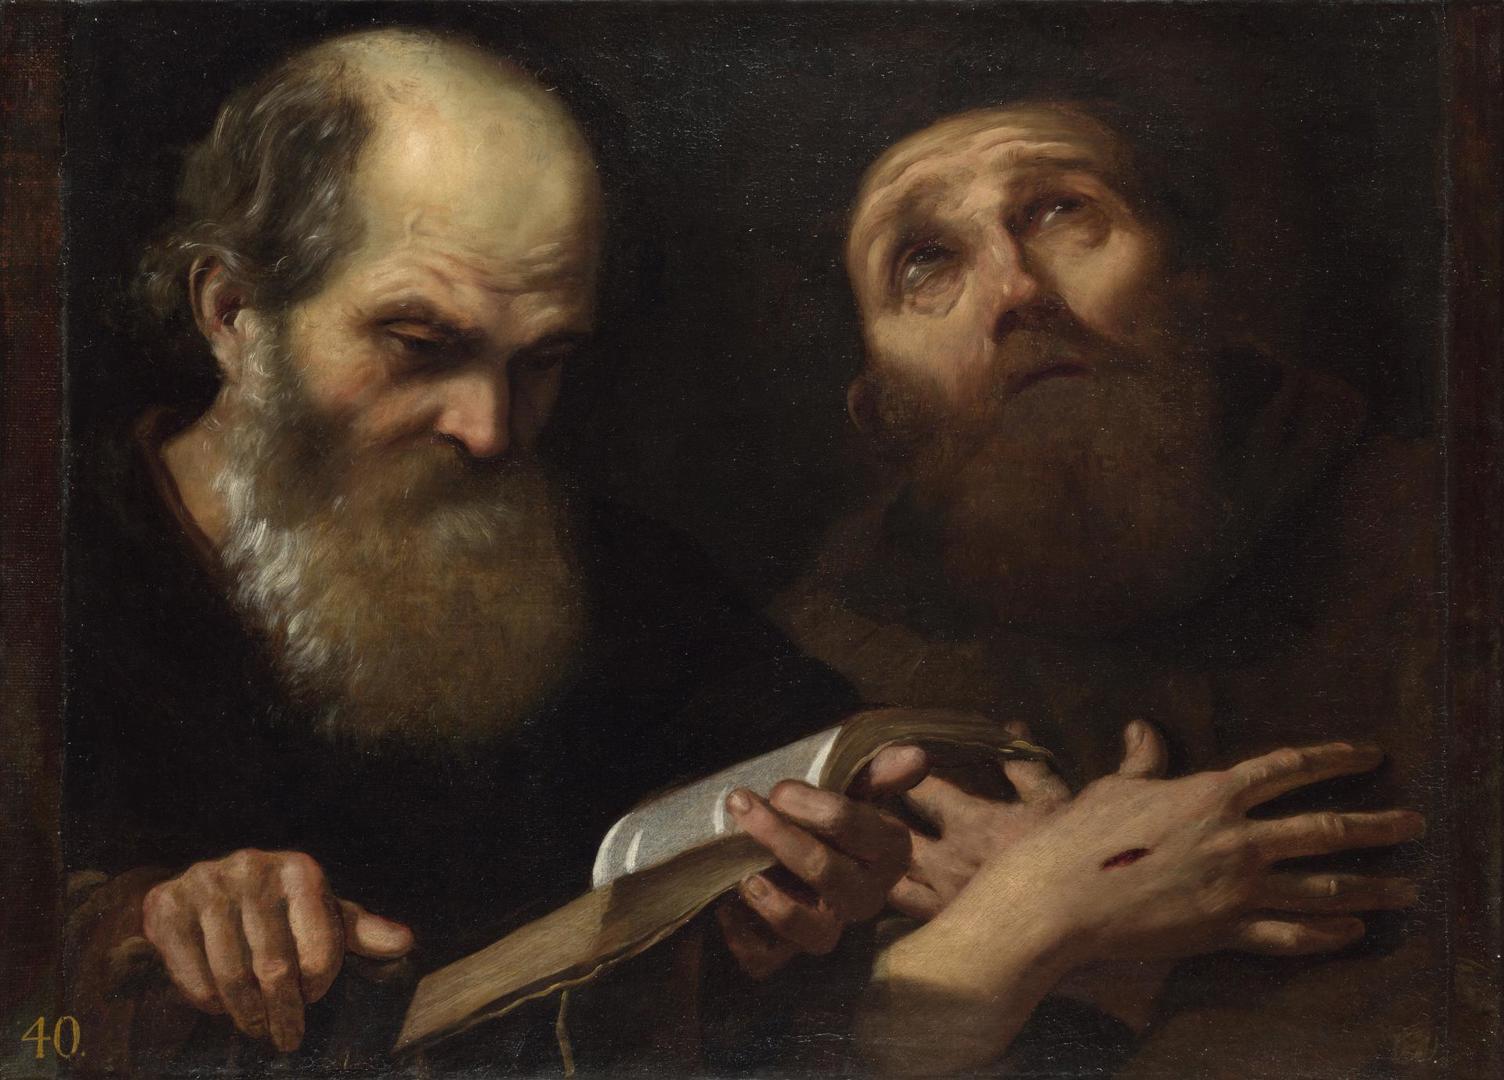 Saints Anthony Abbot and Francis of Assisi by Andrea Sacchi